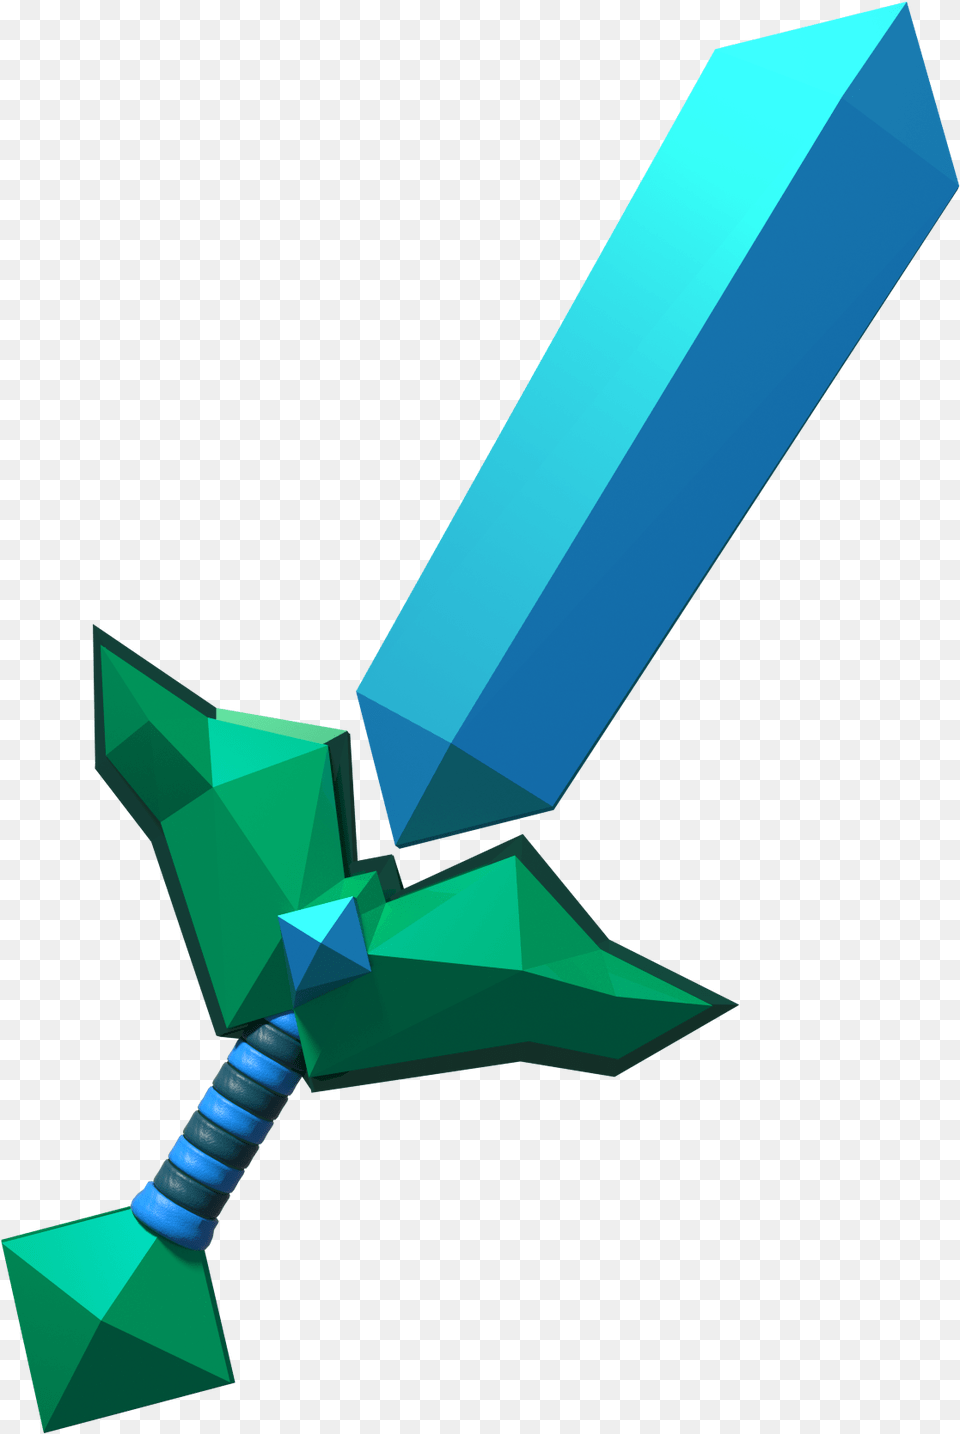 Diamond Sword Imagined By Lanceberyl Minecraft, Weapon Free Png Download